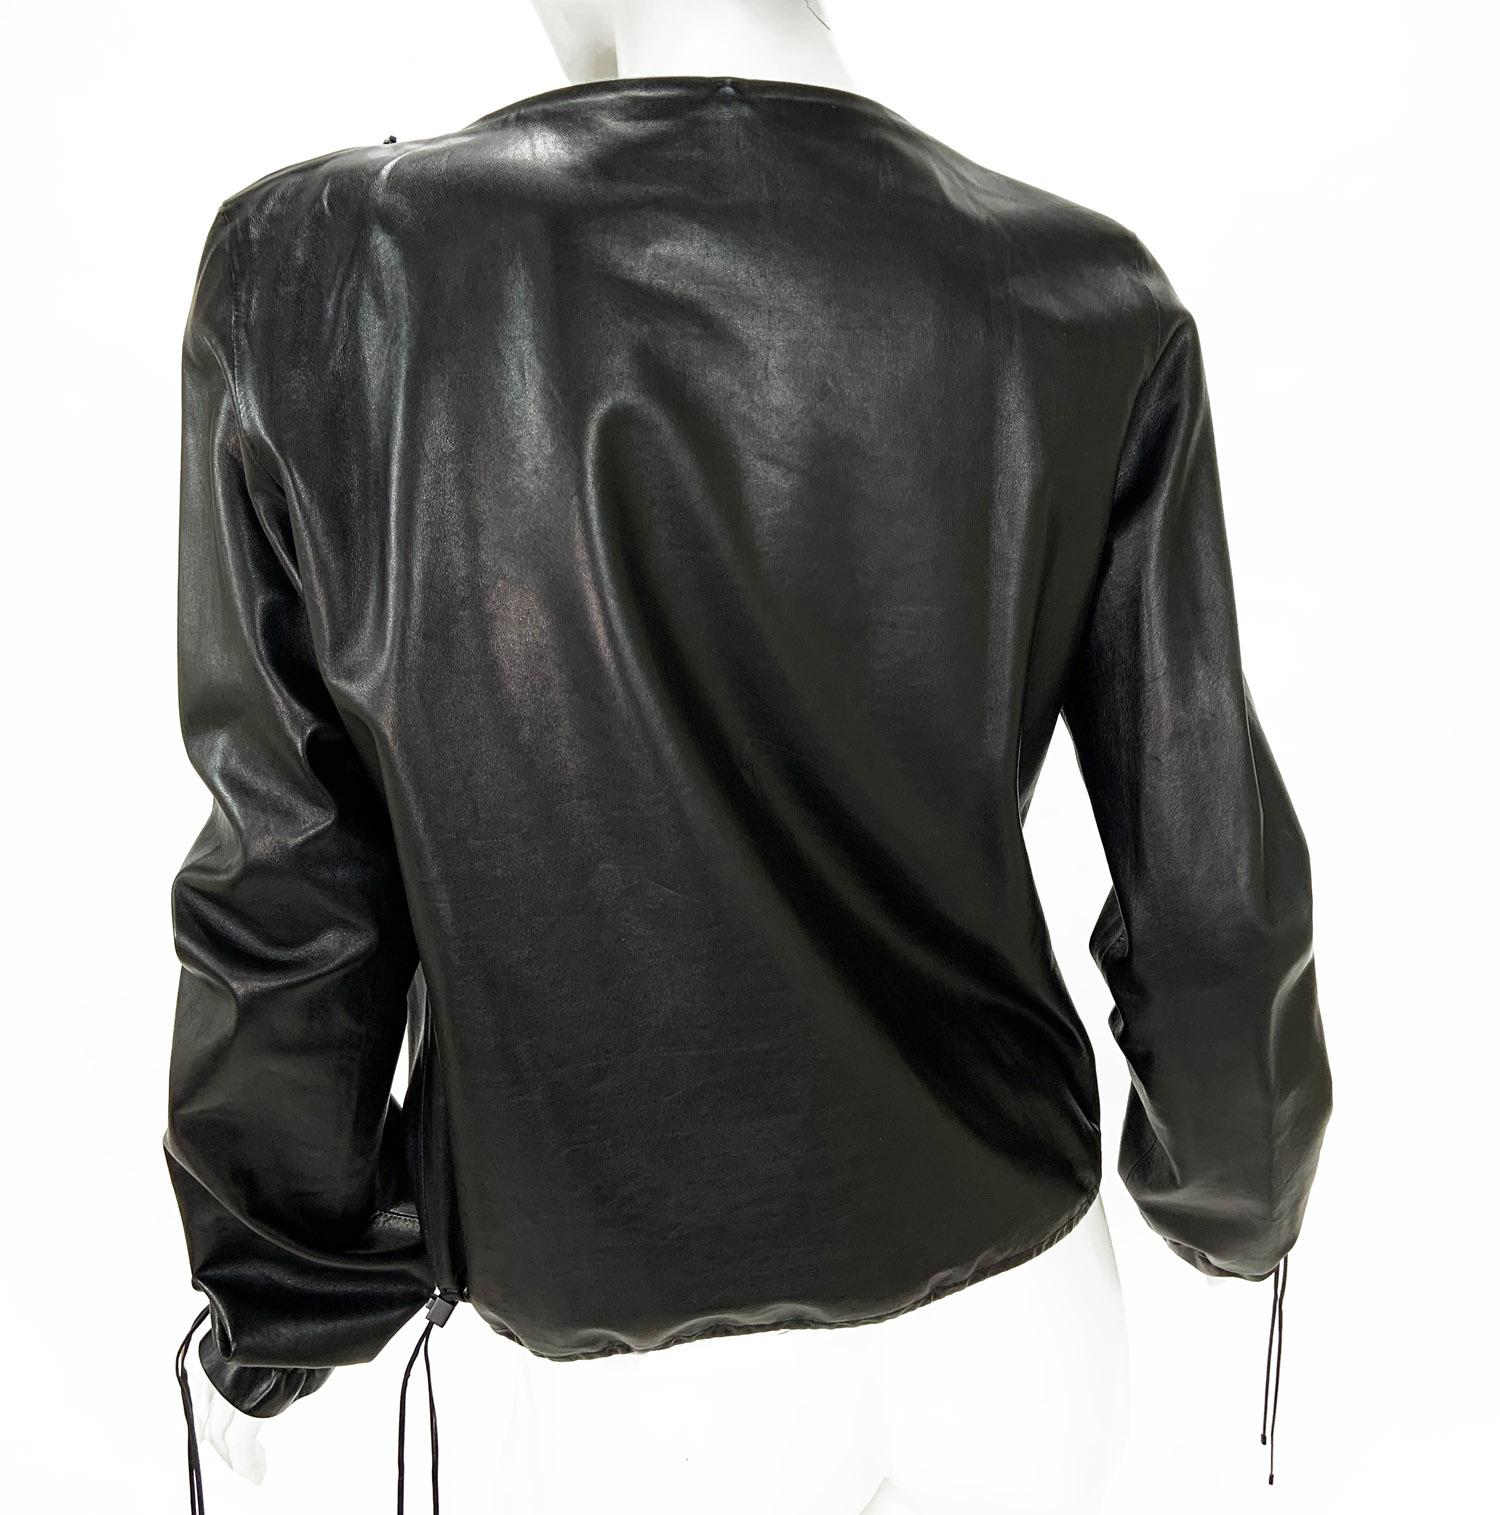 New Tom Ford for Gucci Black Leather Blouson Top Jacket
Italian size 44 - US 8/10 ( please check measurements).
F/W 2001 Collection
100% Soft Black Leather, Straight Silhouette,  Adjustable Drawstring at the Bottom and on the Sleeves, Two Front